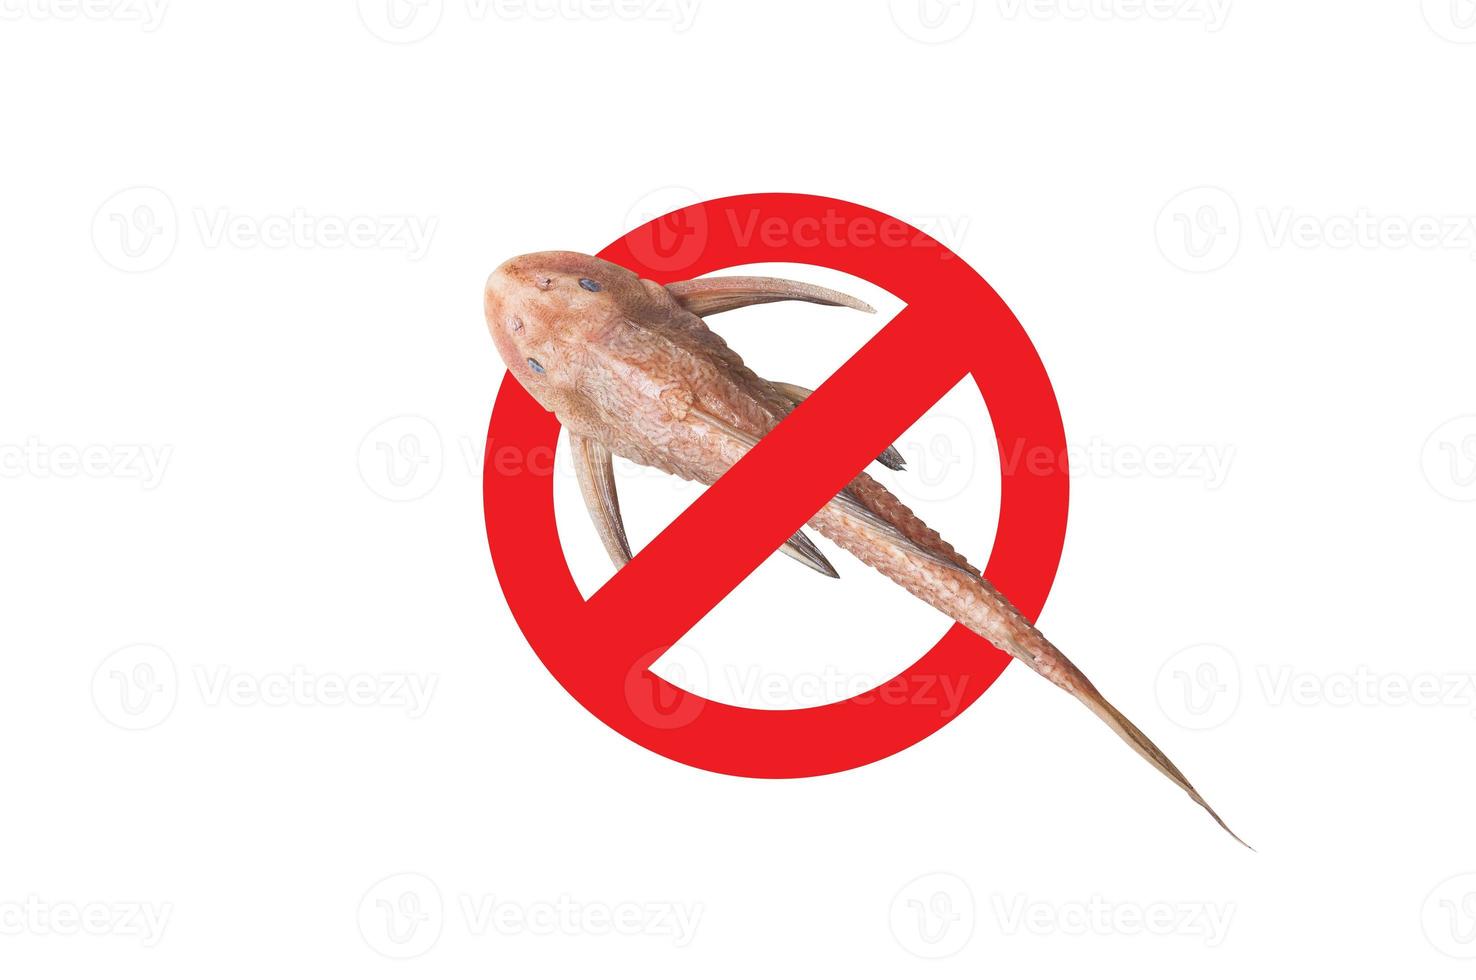 No More icon sucker fish,Sign and dead of sucker fish ,Pleco Catfish Hypostomus Plecostomus fish Pterygoplichthys isolated on white photo